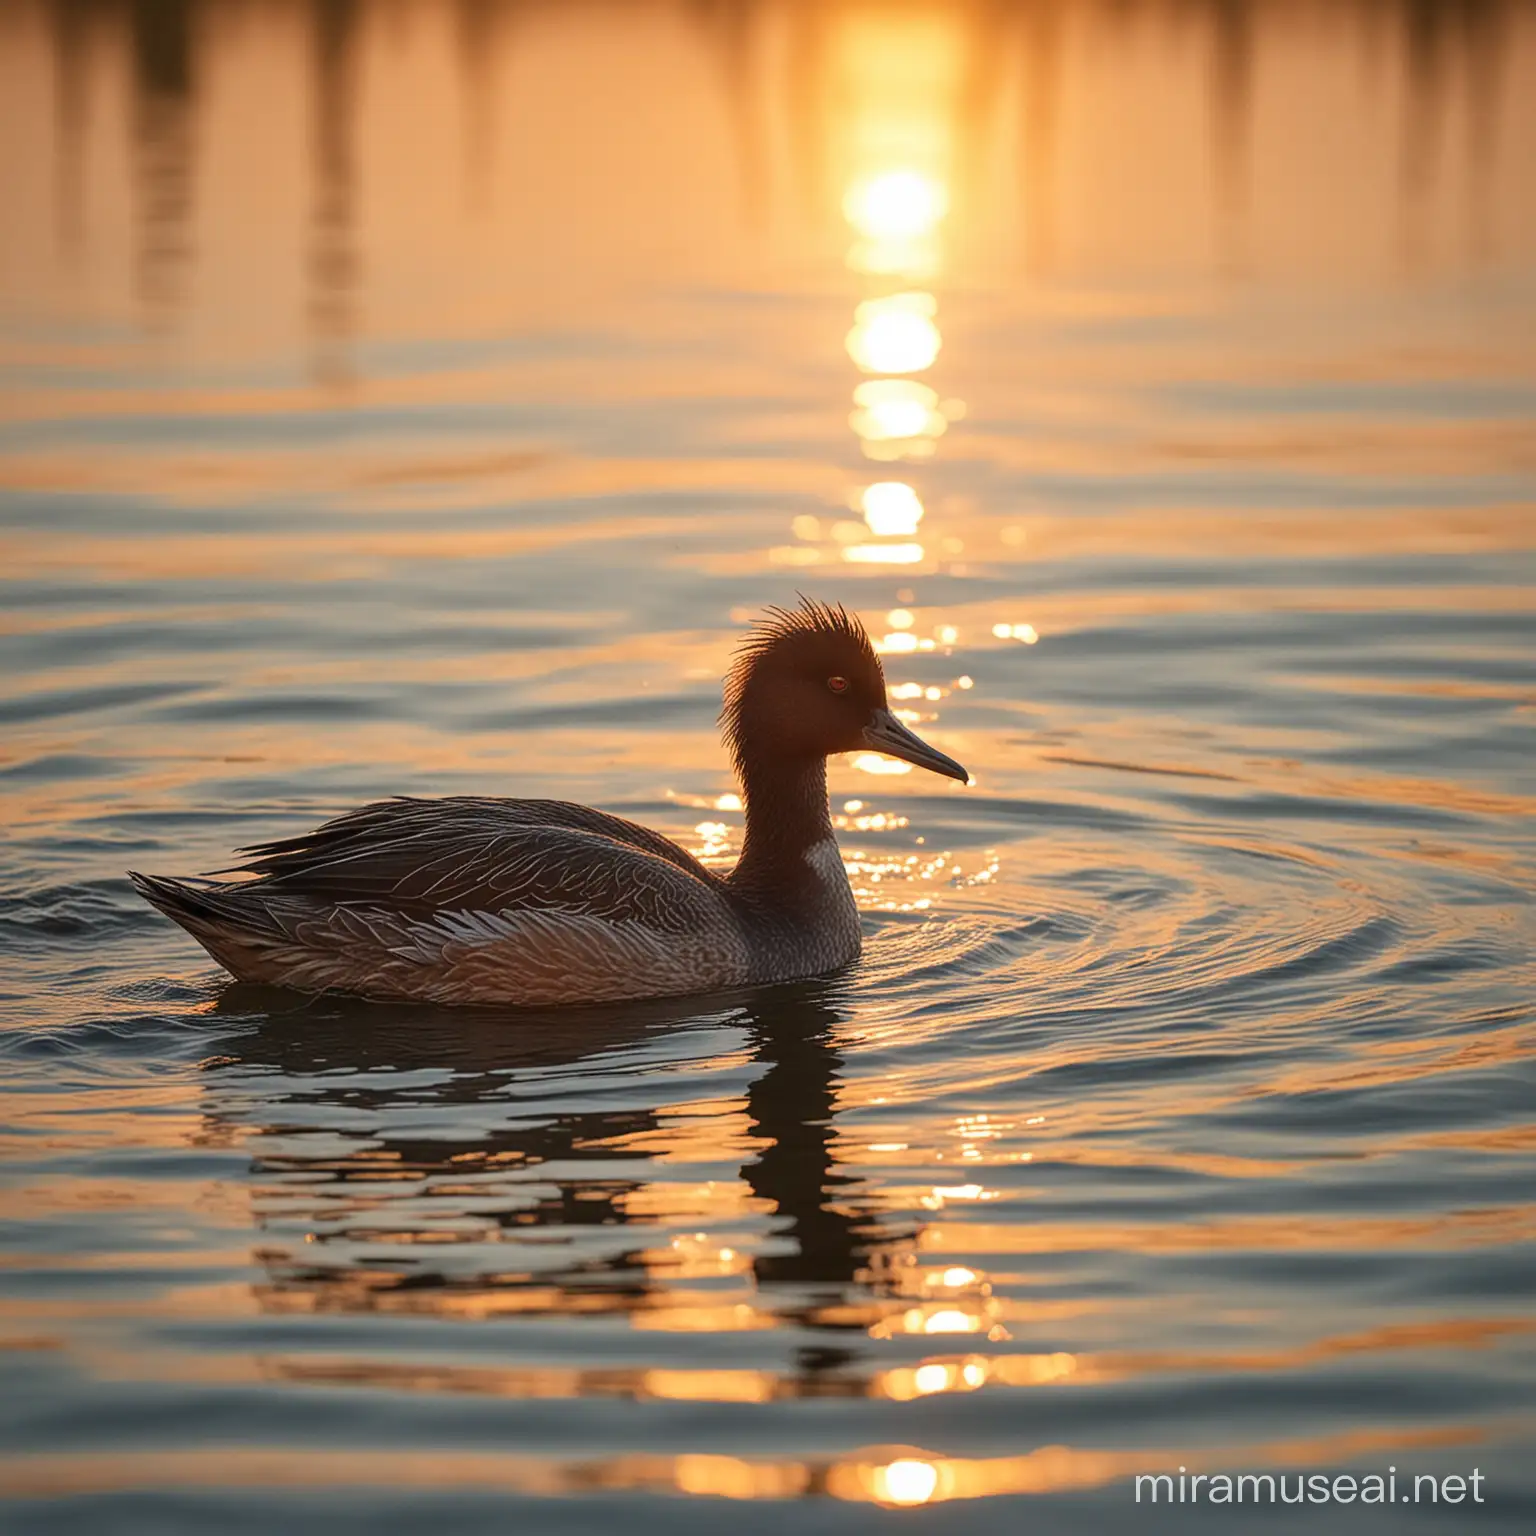 Tranquil Sunset Scene with Swimming Podiceps Cristatus